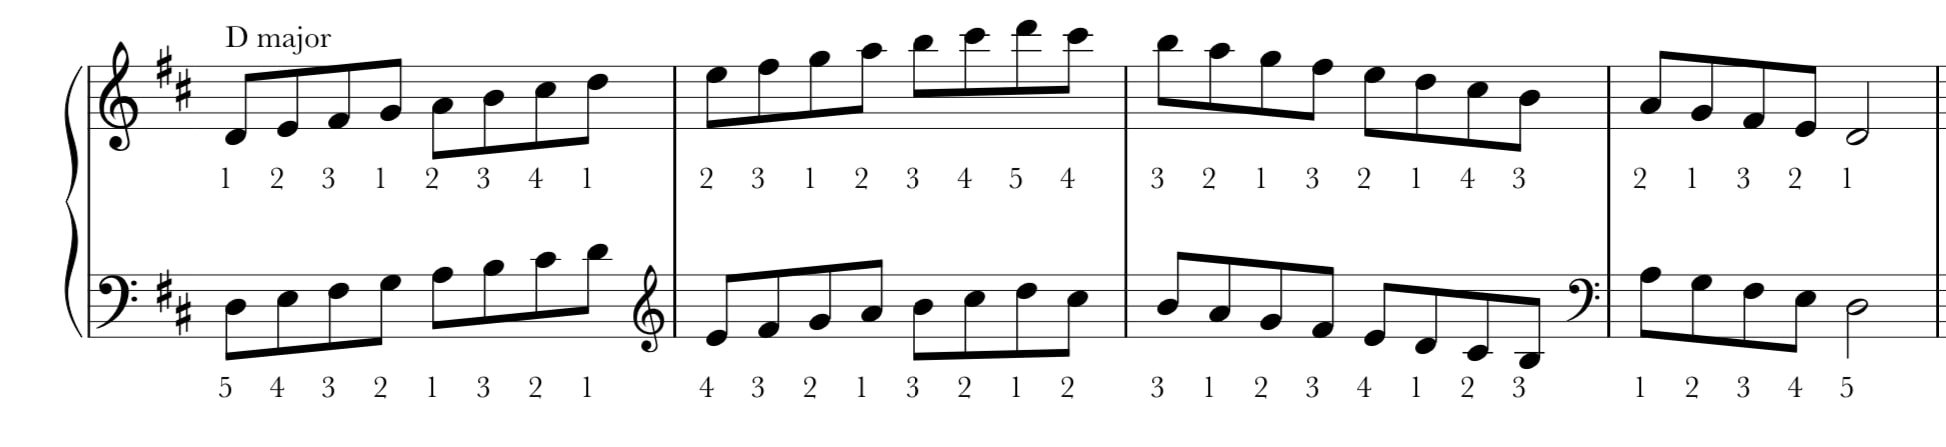 Notation for two octaves of D major scale on the piano